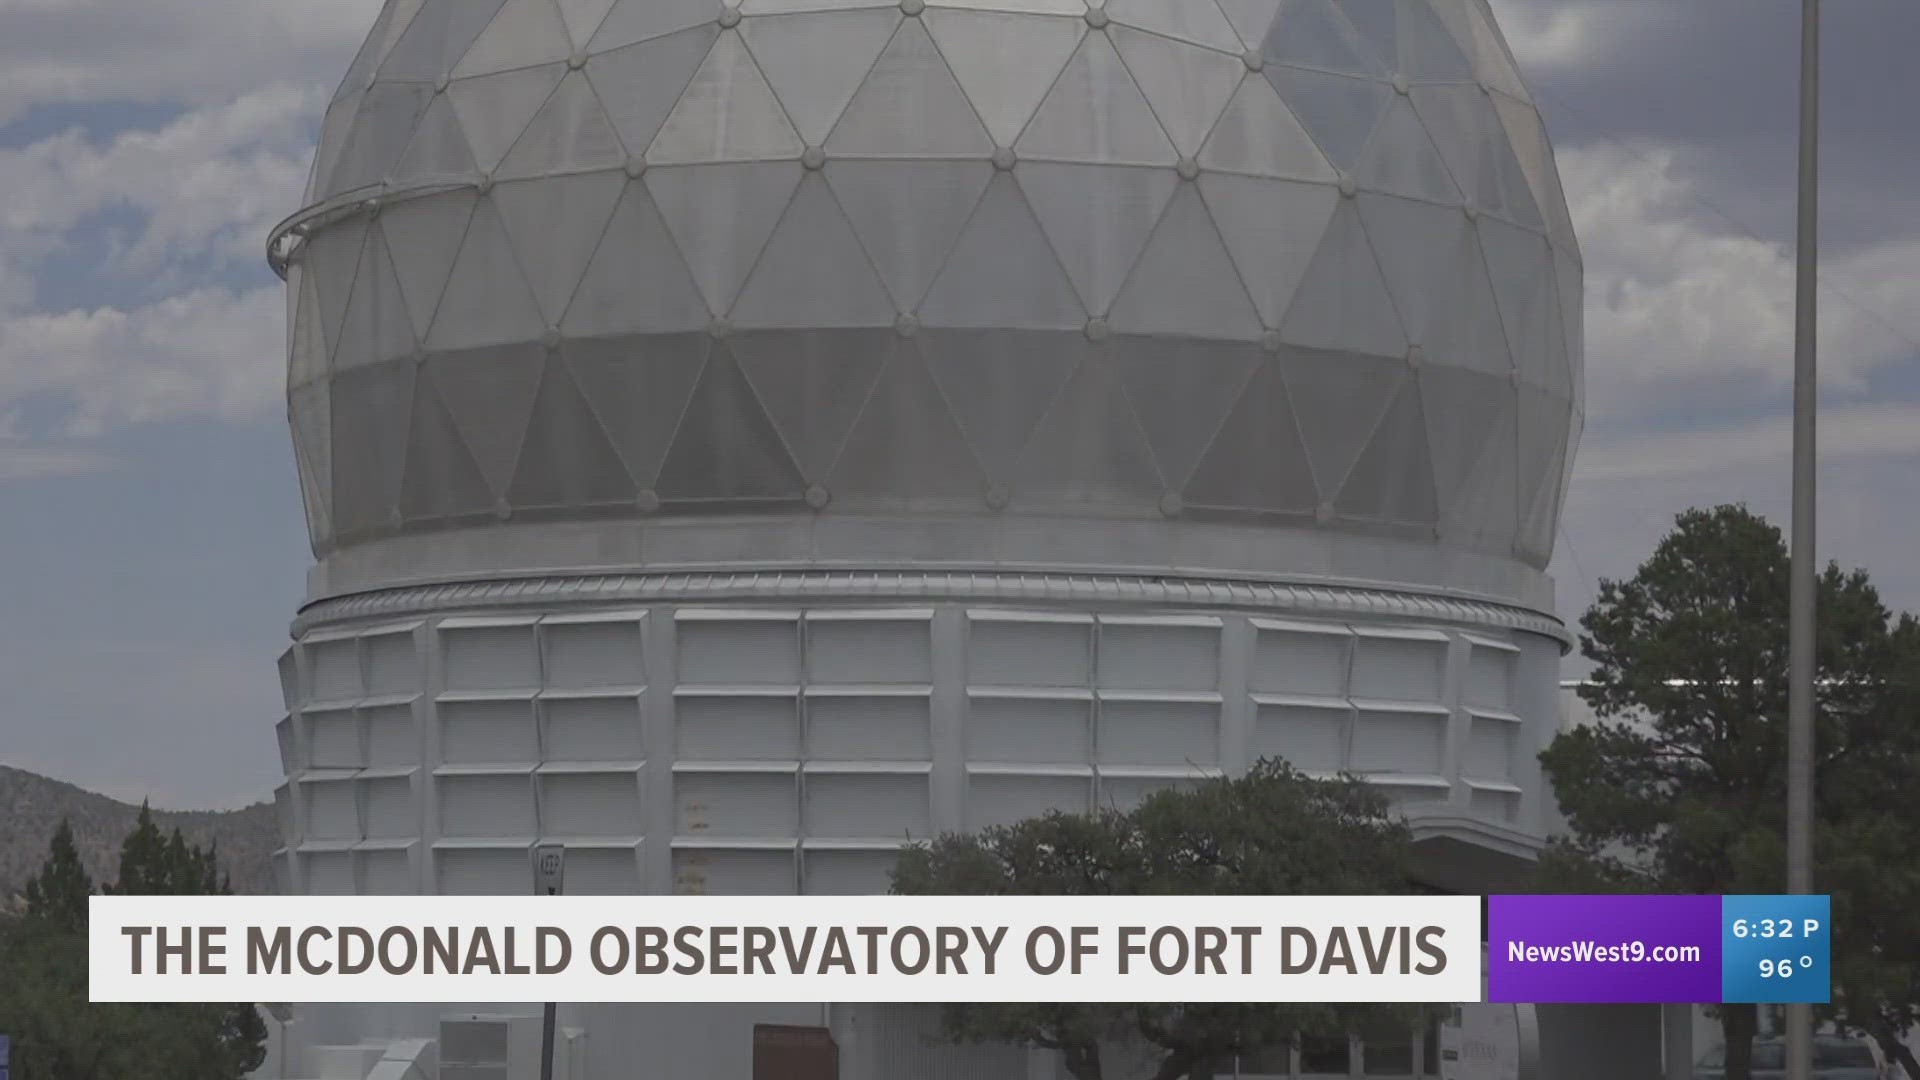 One of the largest telescopes in the world creates a community of enthusiasts in the Fort Davis Mountains.